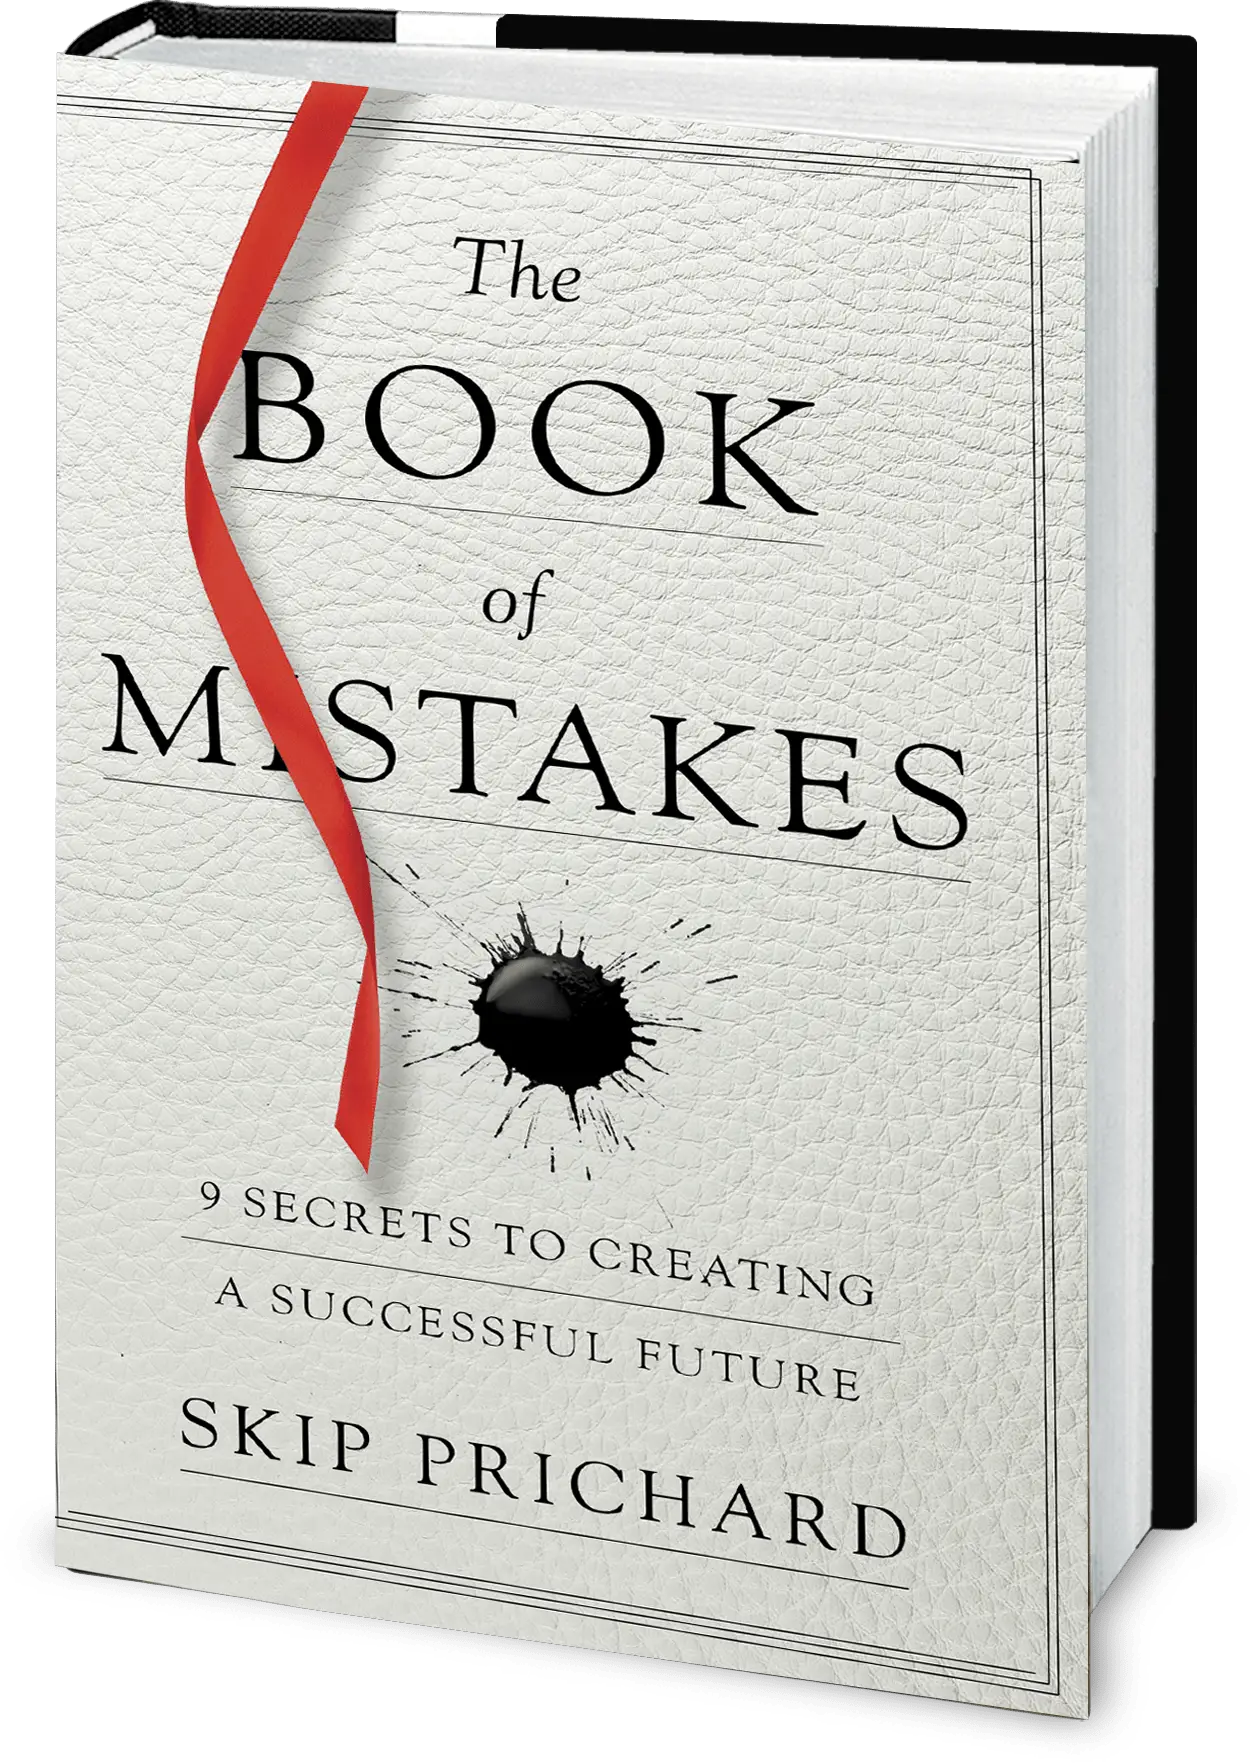 Skip Prichard's The Book Of Mistakes